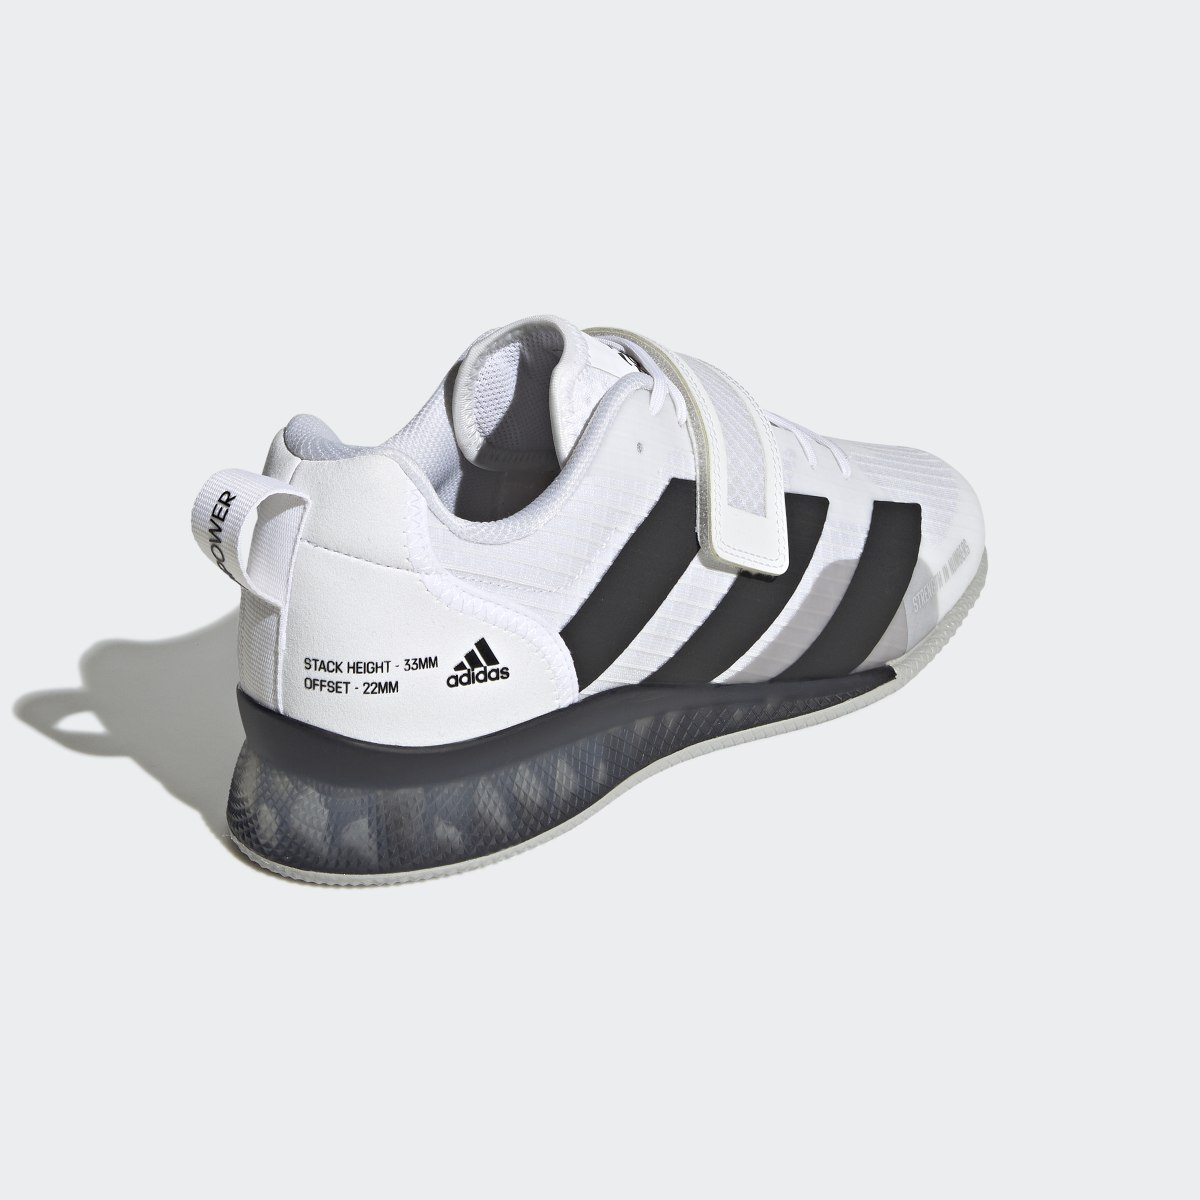 Adidas Adipower Weightlifting 3 Shoes. 6